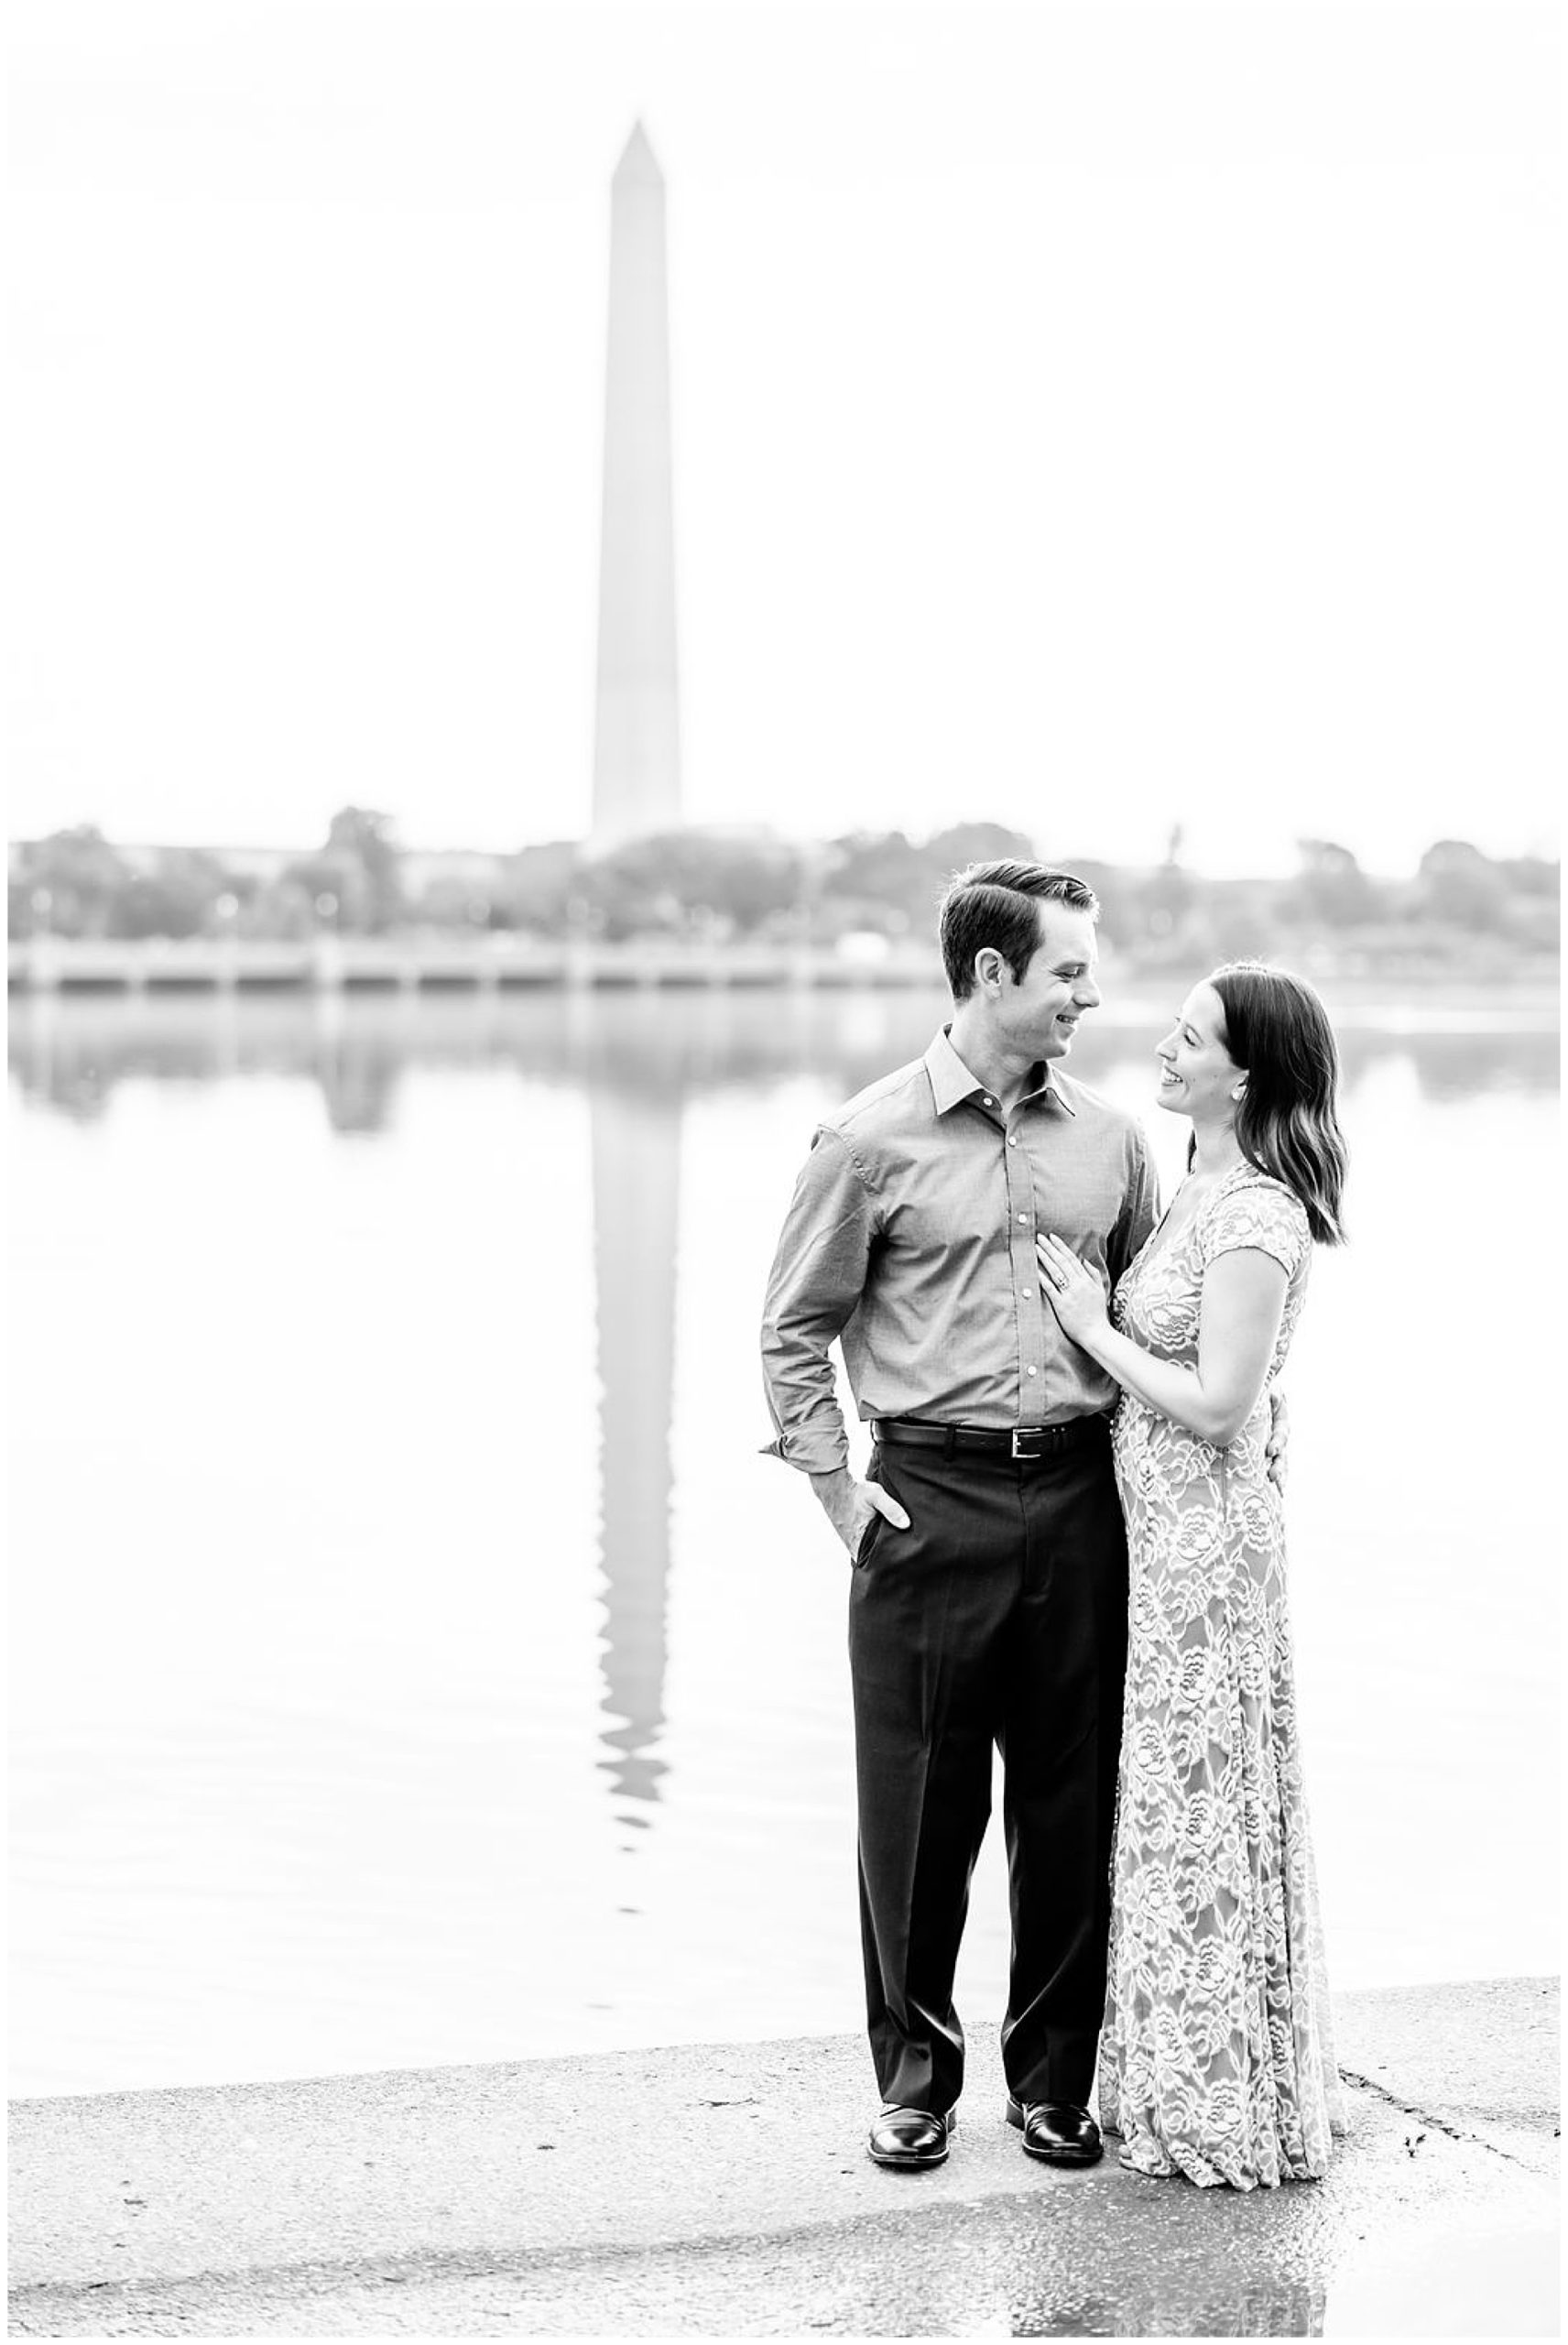 pink sunrise Lincoln Memorial engagement, DC engagement session, DC engagement photographer, formal DC engagement photos, DC elopement photographer, DC wedding photographer, classic DC engagement photos, luxury DC engagement photographer, Rachel E.H. Photography, black and white, woman's hand on mans chest, couple looking at each other